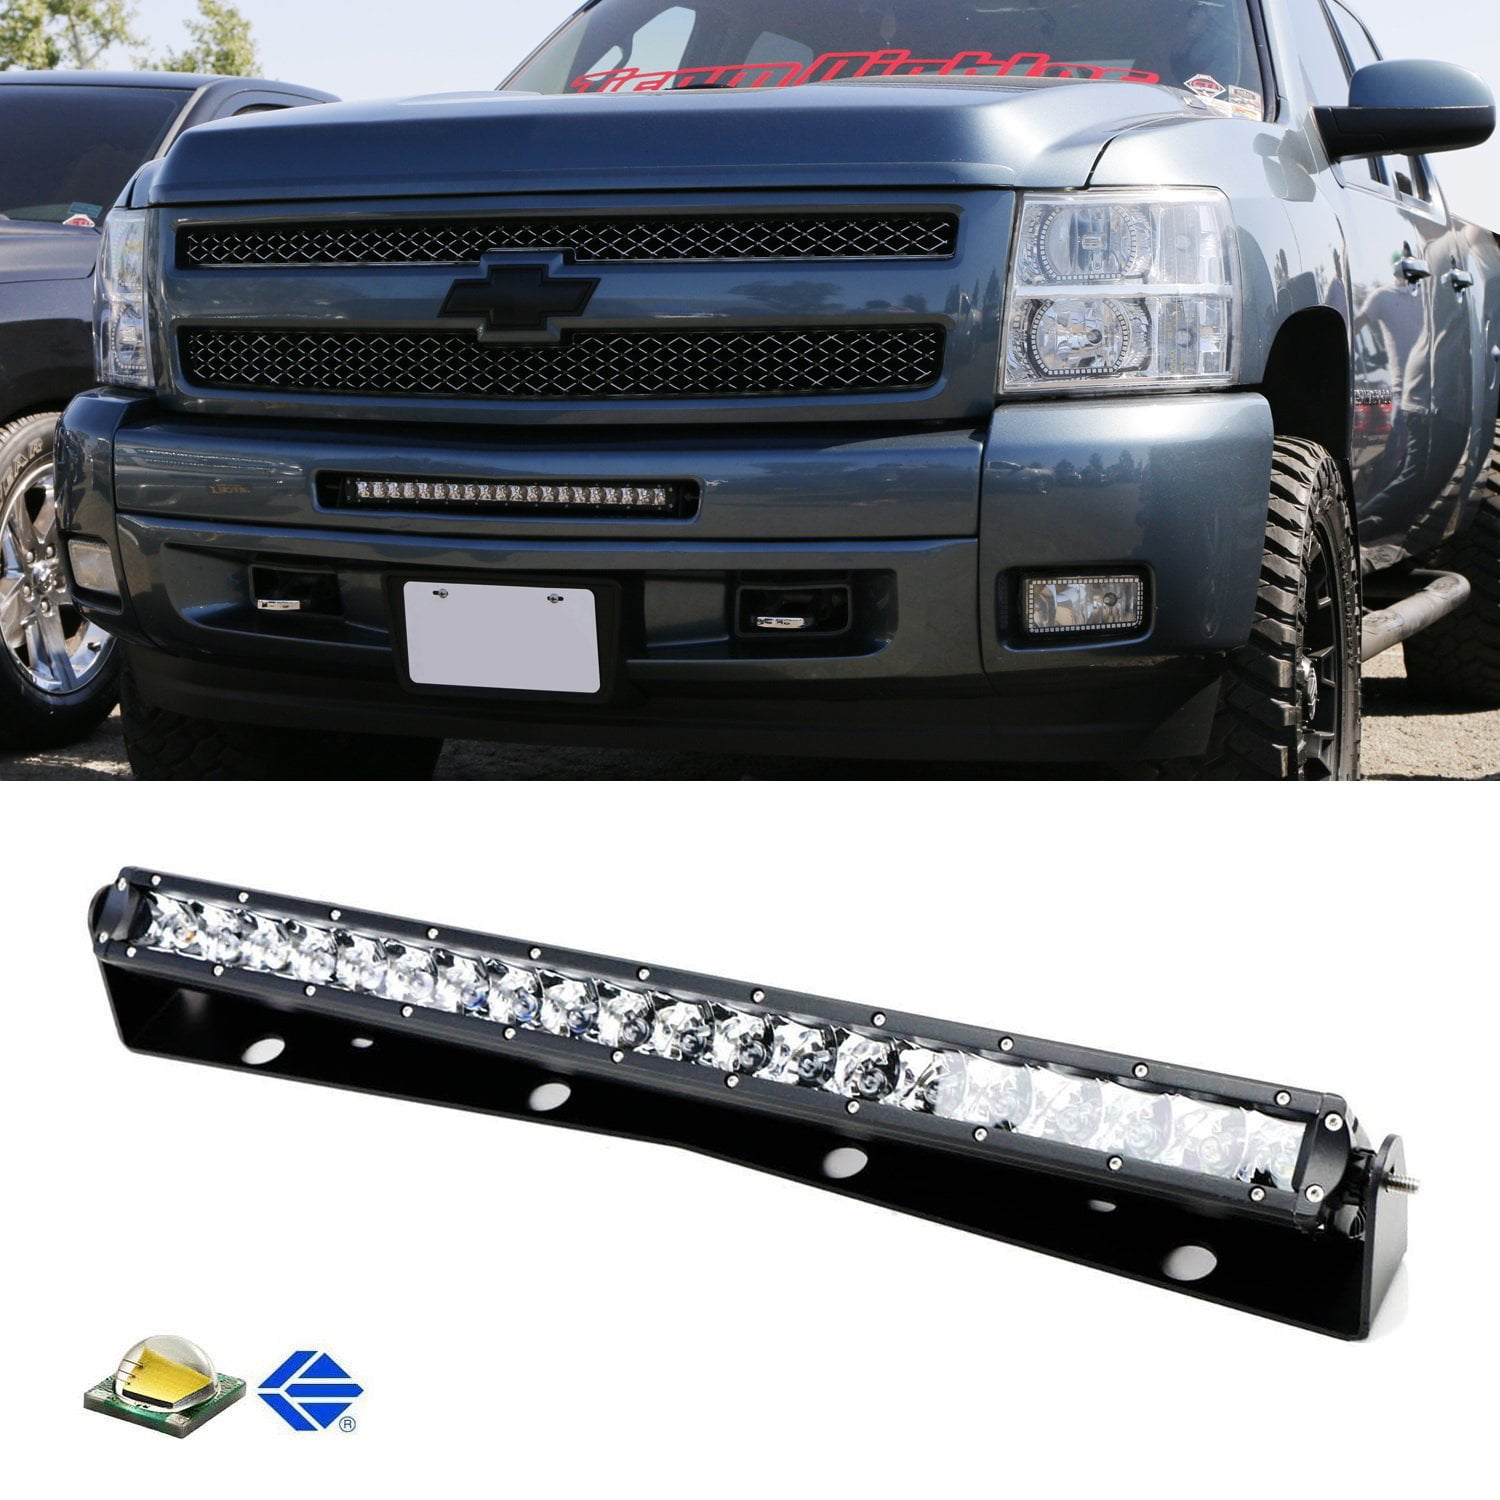 Includes Lower Bumper Opening Mounting Brackets & On/Off Switch Wiring Kit iJDMTOY Auto Accessories iJDMTOY Lower Grille 20 LED Light Bar Kit For 2009-13 GMC Sierra 1500 & 08-14 2500 3500 HD 100W CREE LED Lightbar 1 